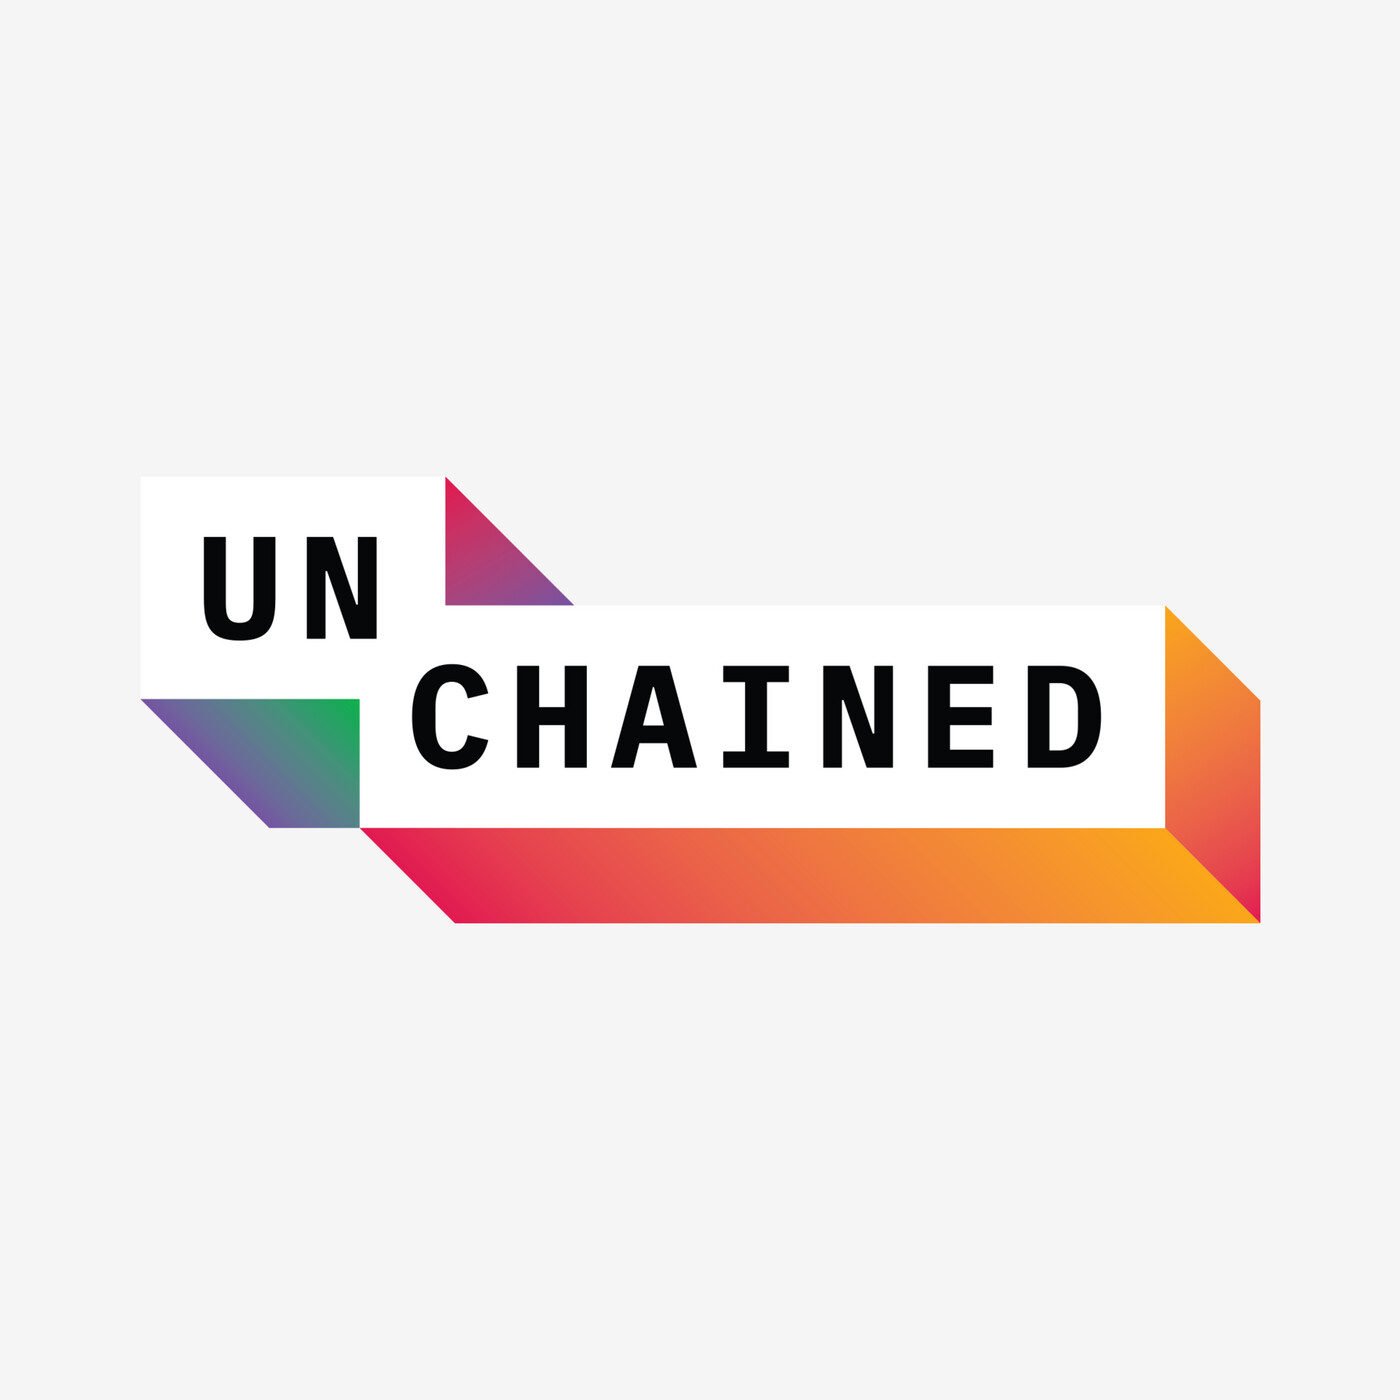 UNCHAINED:  How Gitcoin 2.0 Could Someday Help Reward People for Doing Good